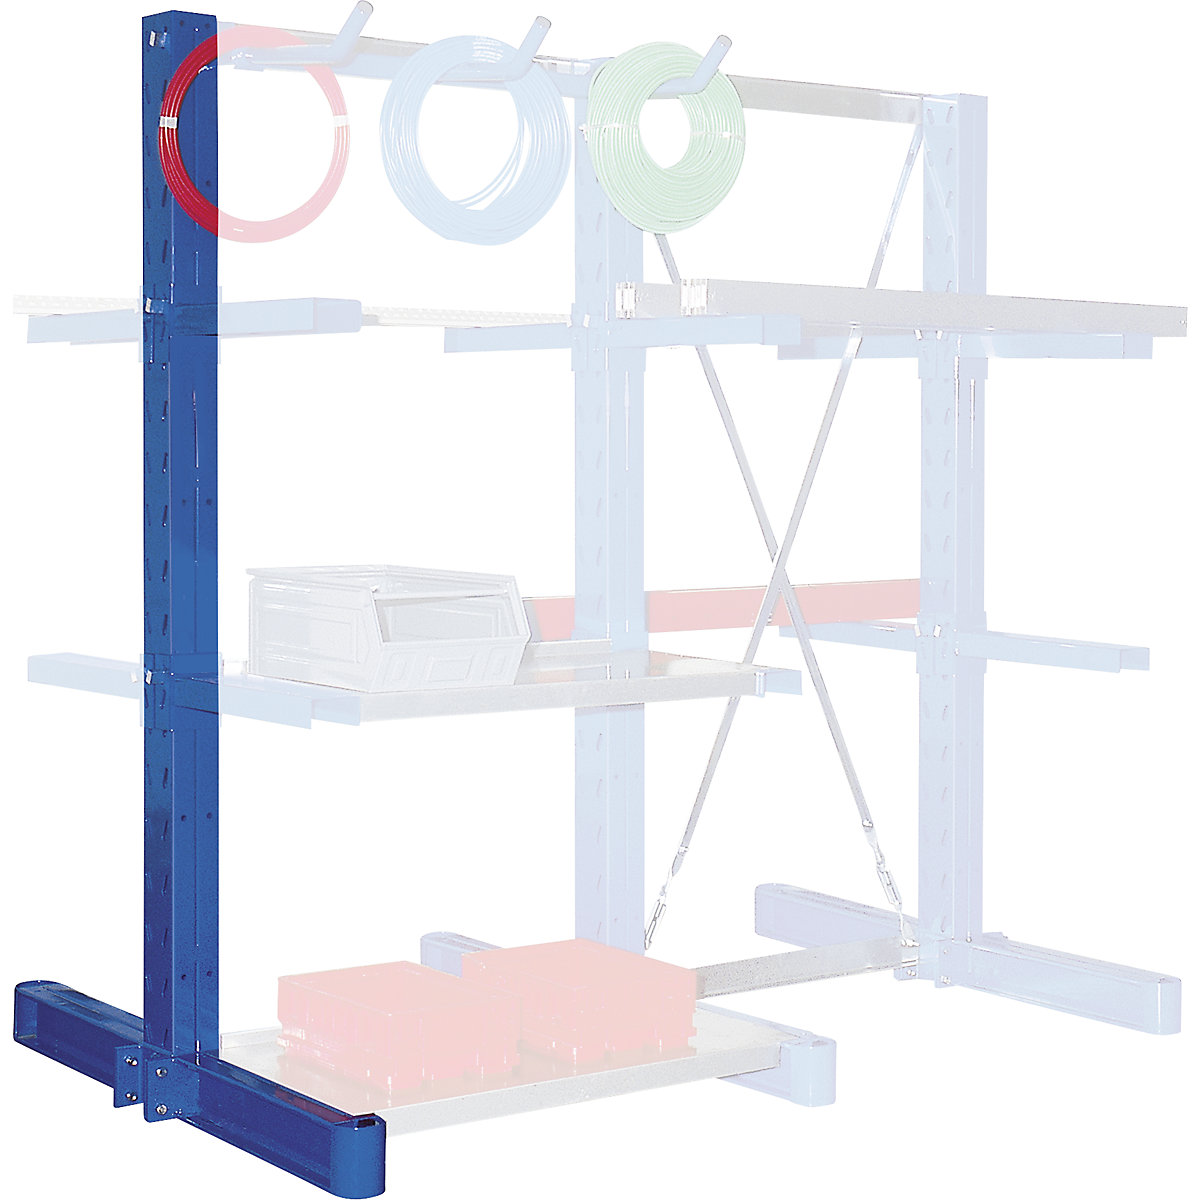 Cantilever racking upright, double sided – eurokraft pro, upright height 3300 mm, max. load 1600 kg, blue-5